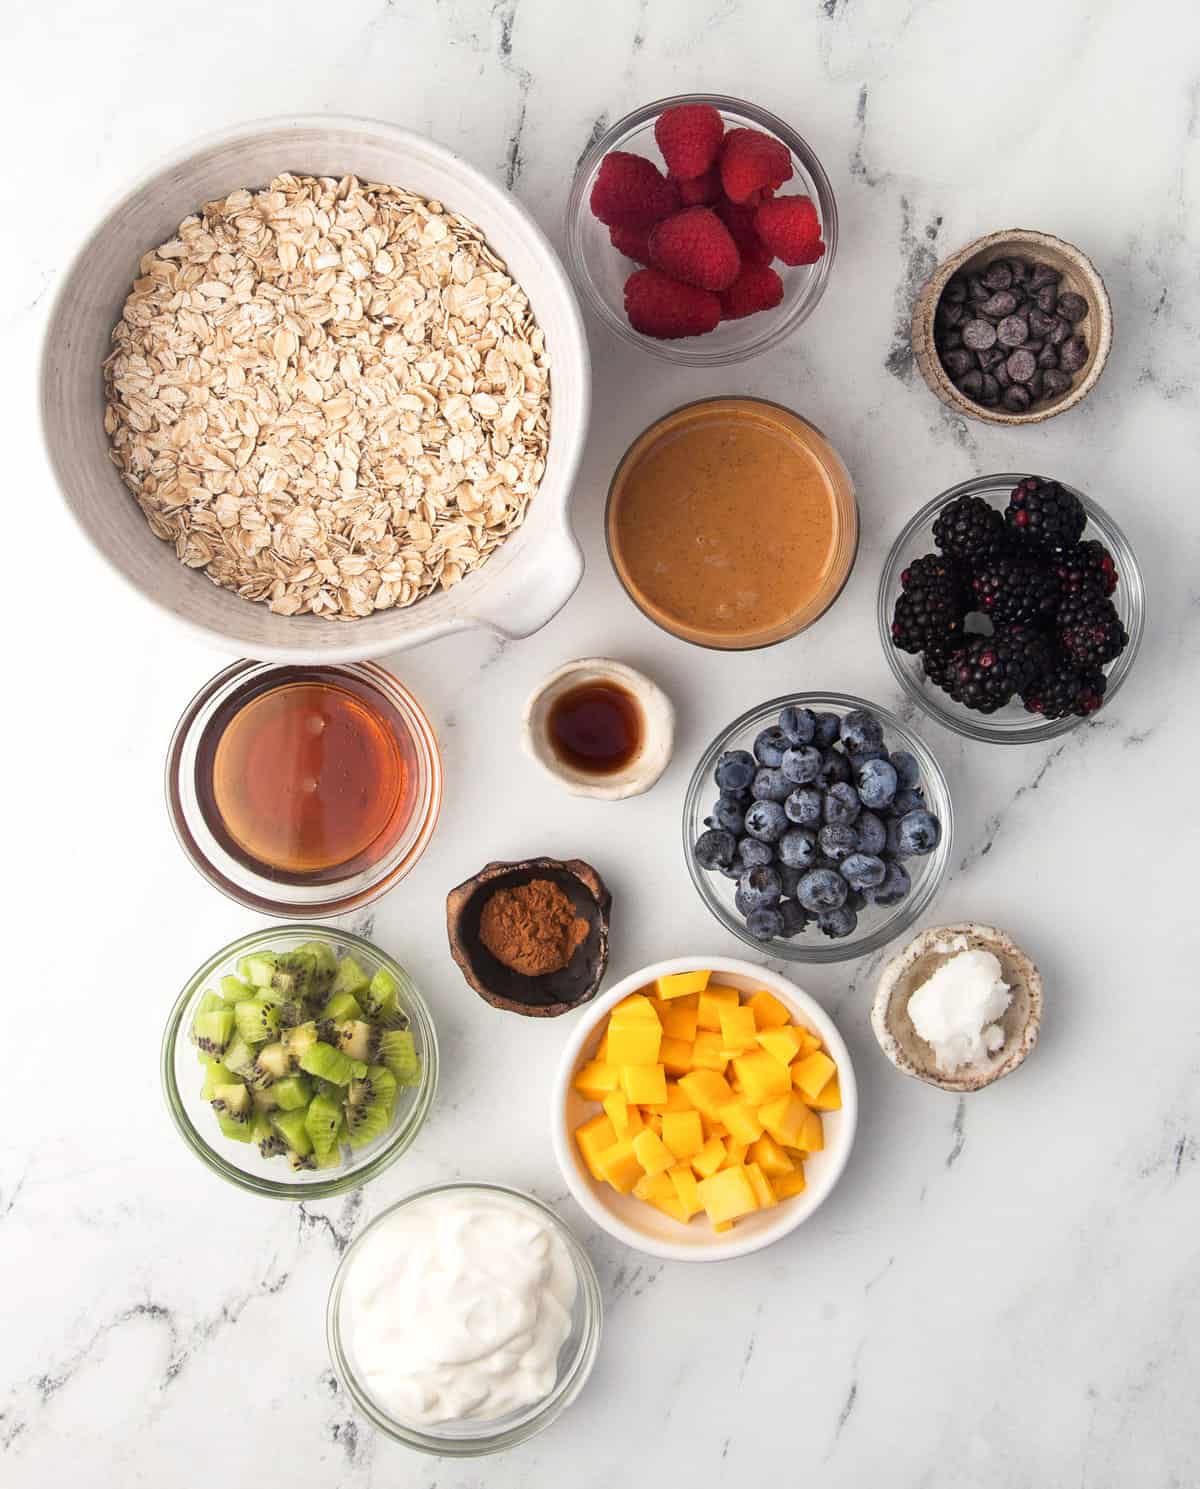 Ingredients needed for recipe, including oats and fruit.